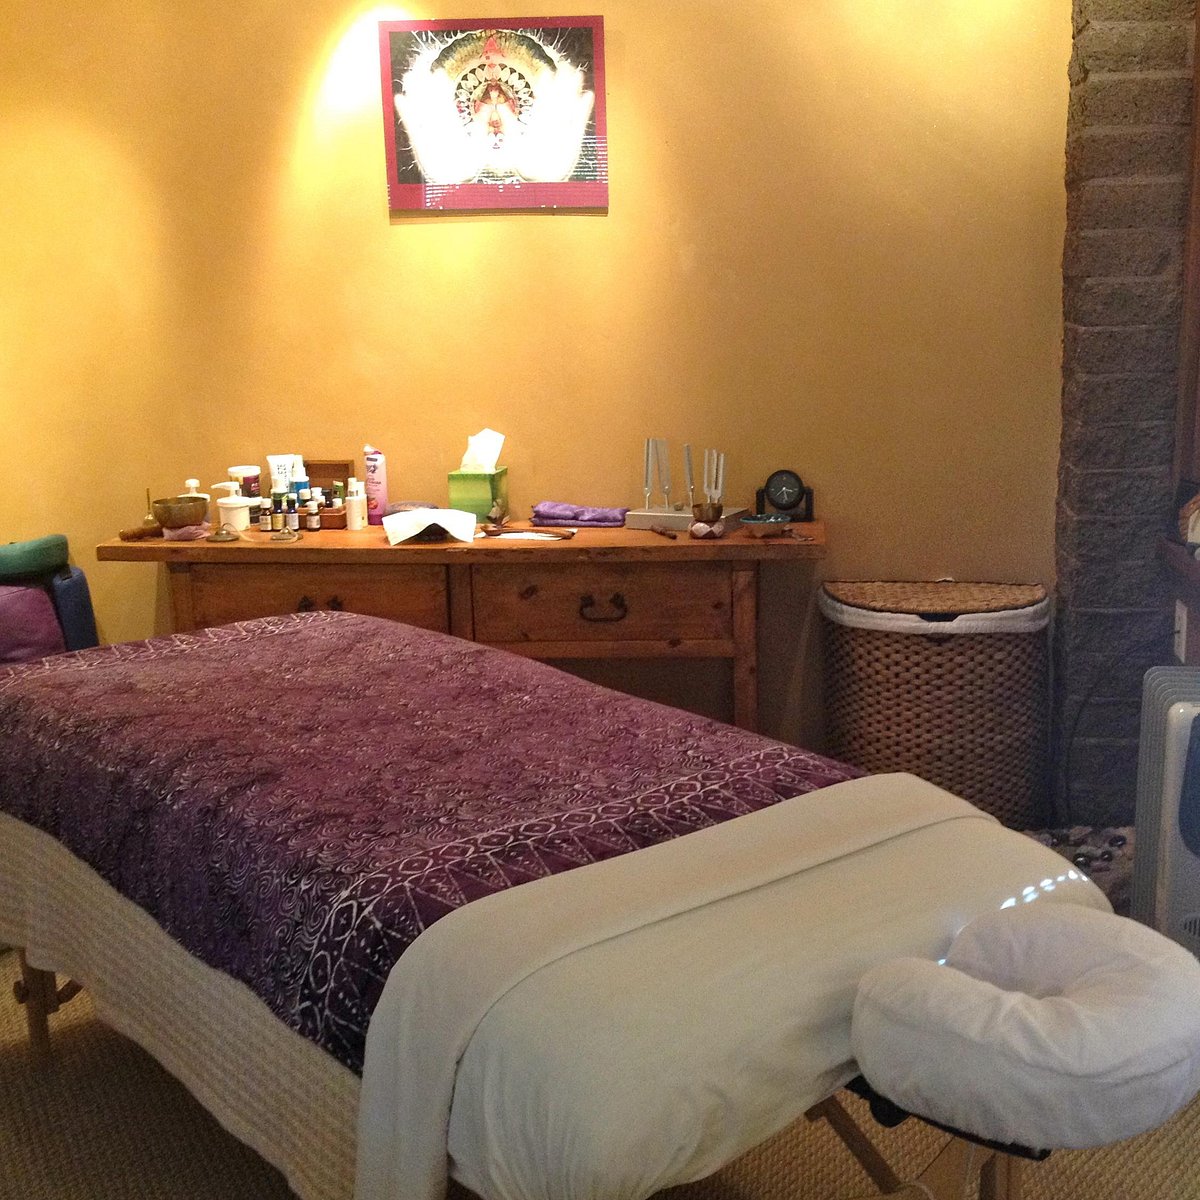 Massage in Idaho Falls - Healing Hands For The Soul Massage